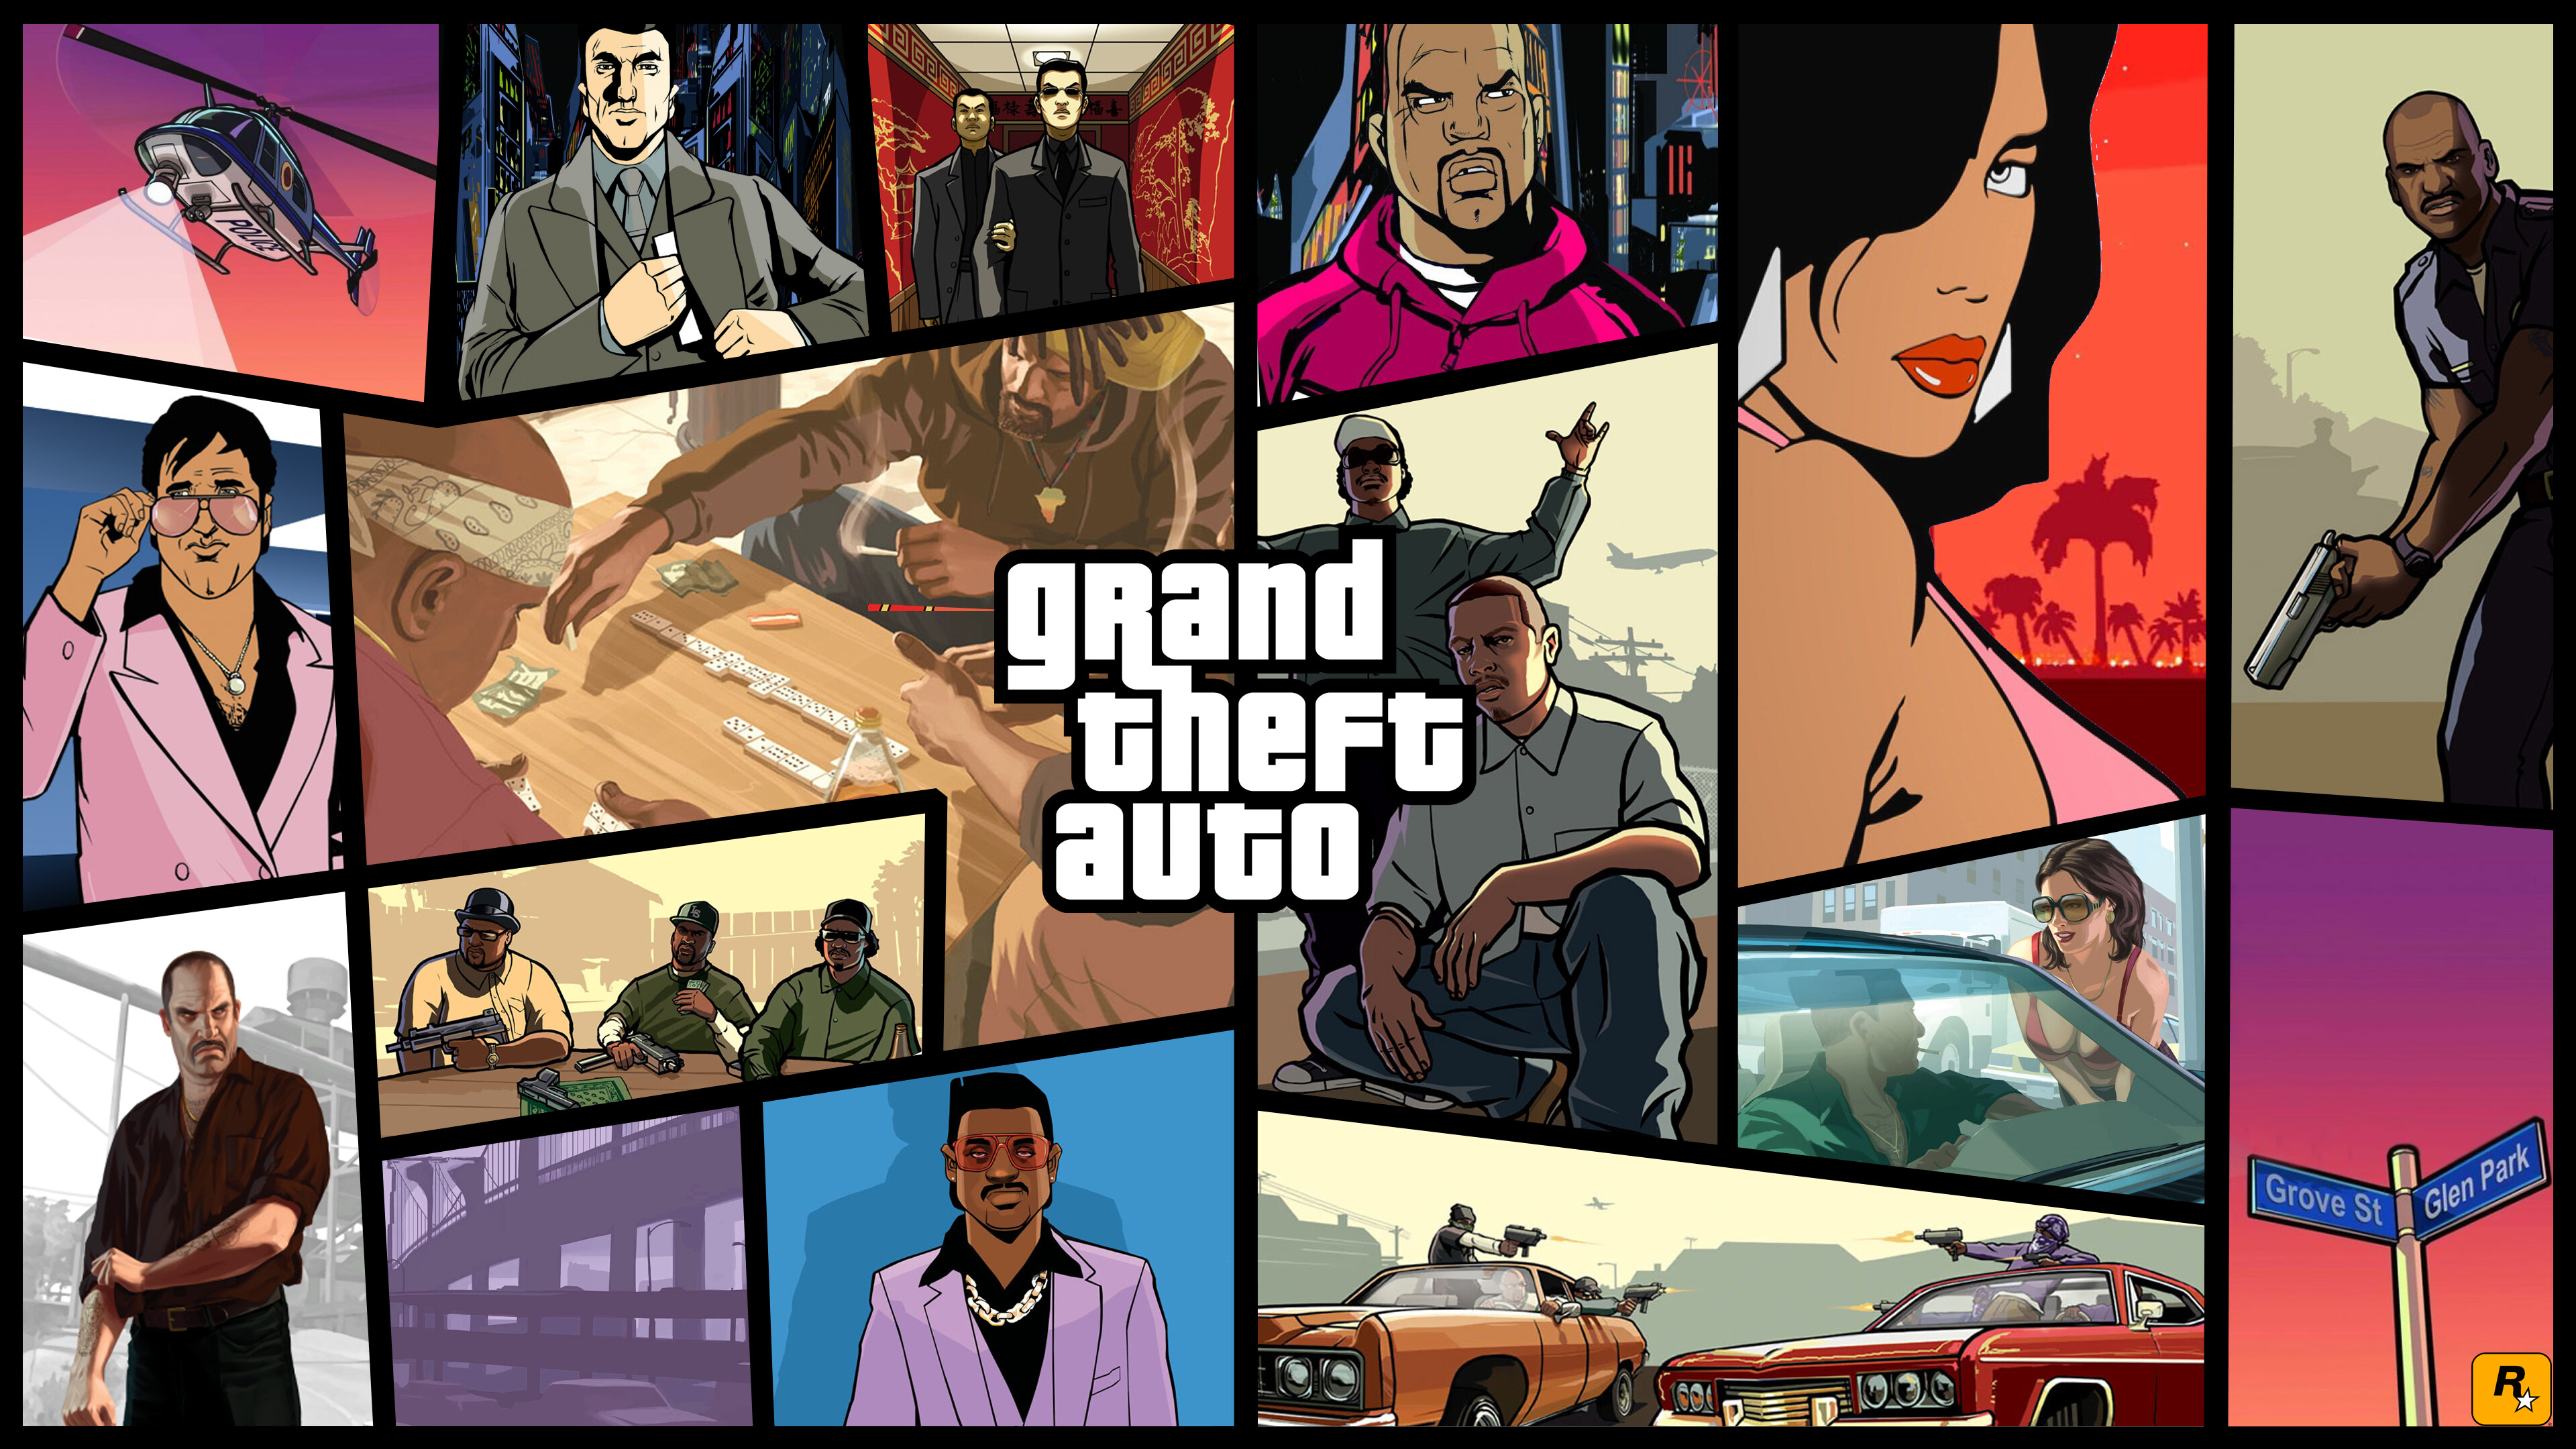 Grand Theft Auto: San Andreas: GTA, Published by Rockstar Games. 3840x2160 4K Wallpaper.